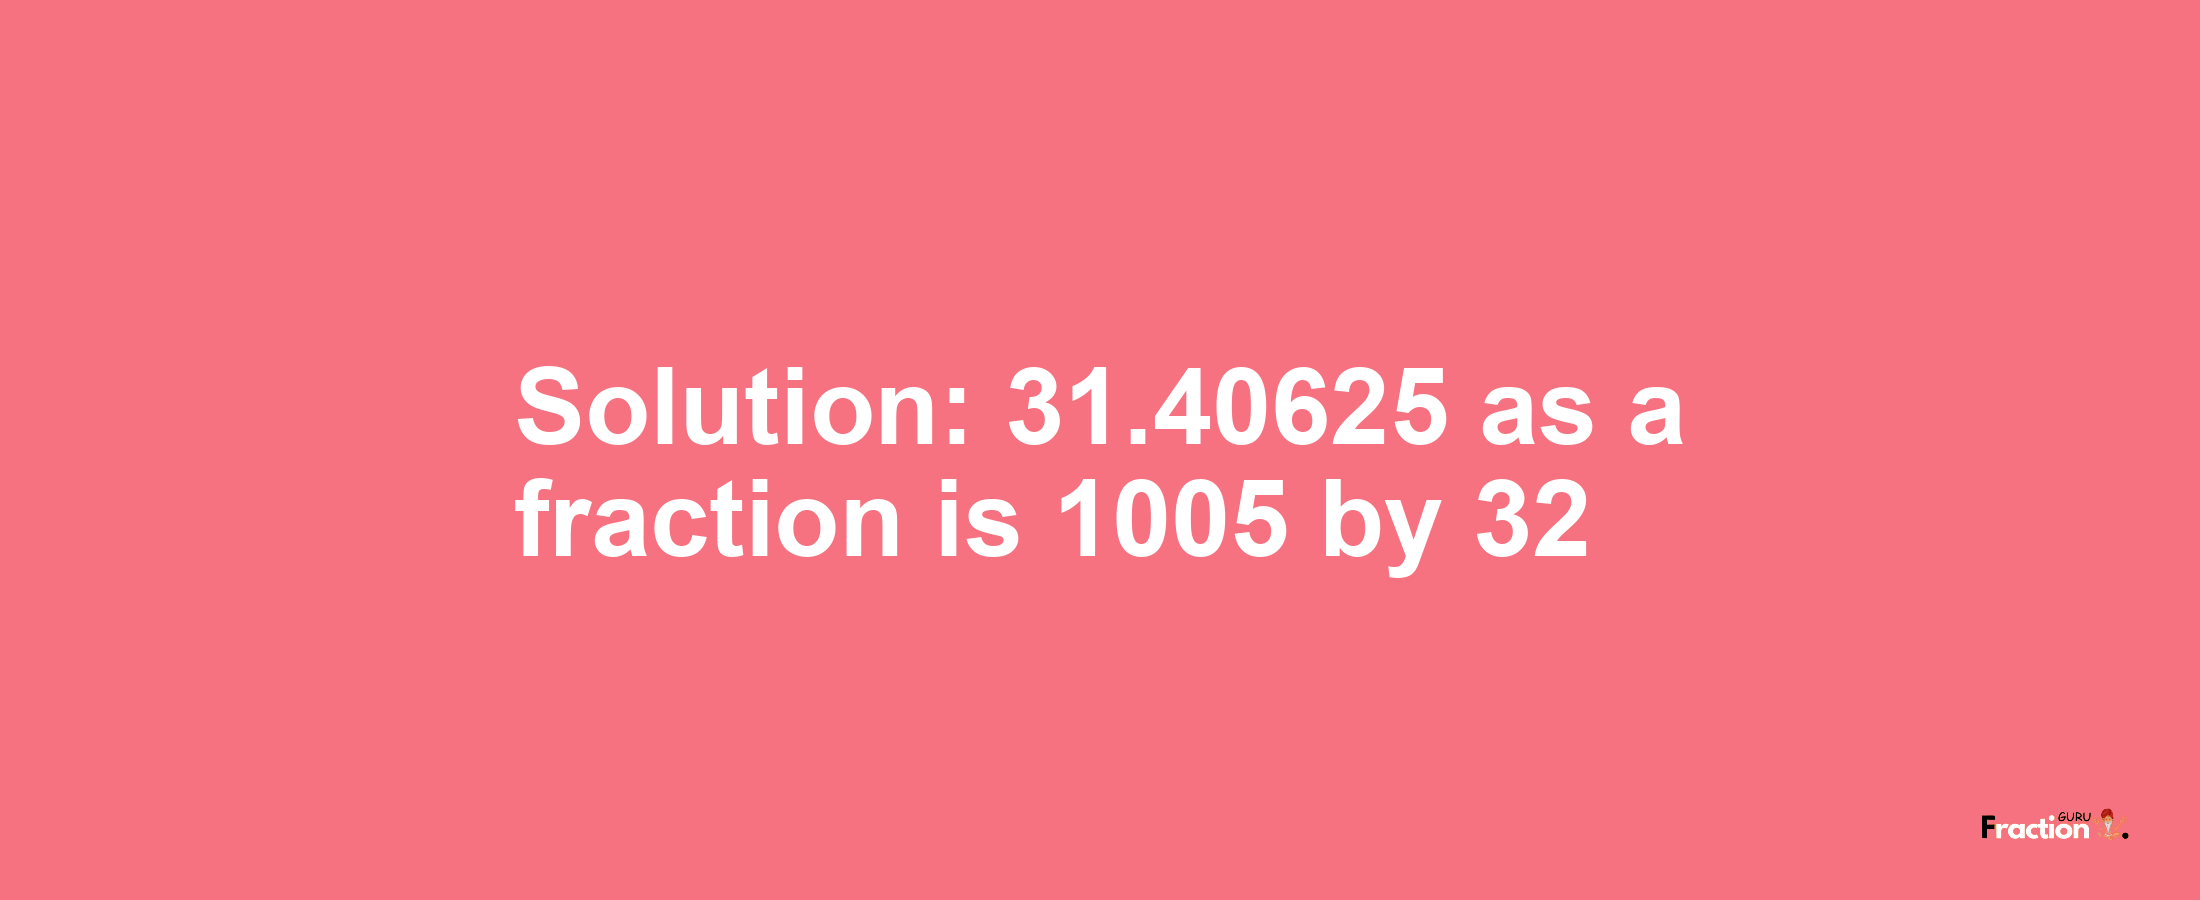 Solution:31.40625 as a fraction is 1005/32